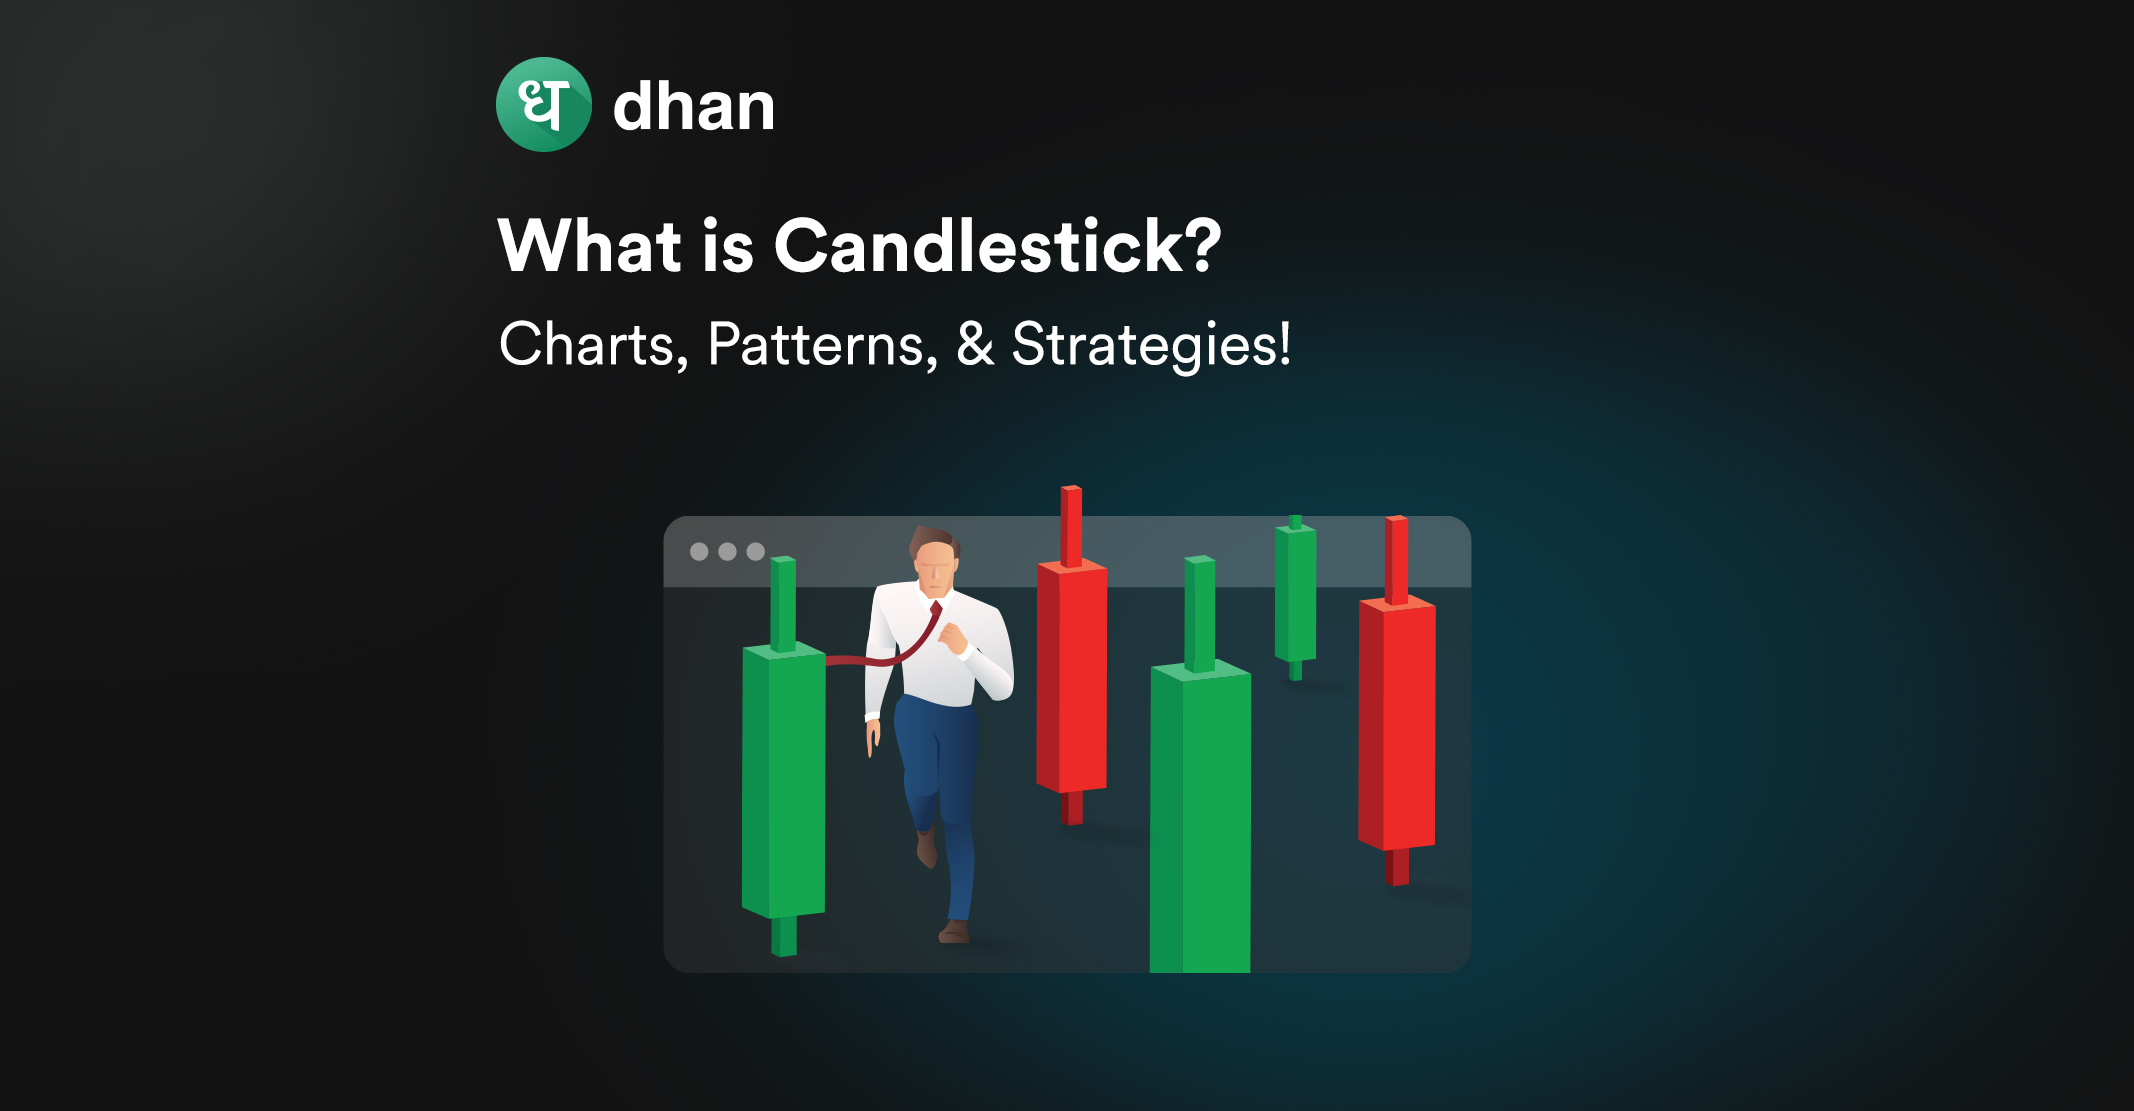 What is Candlestick